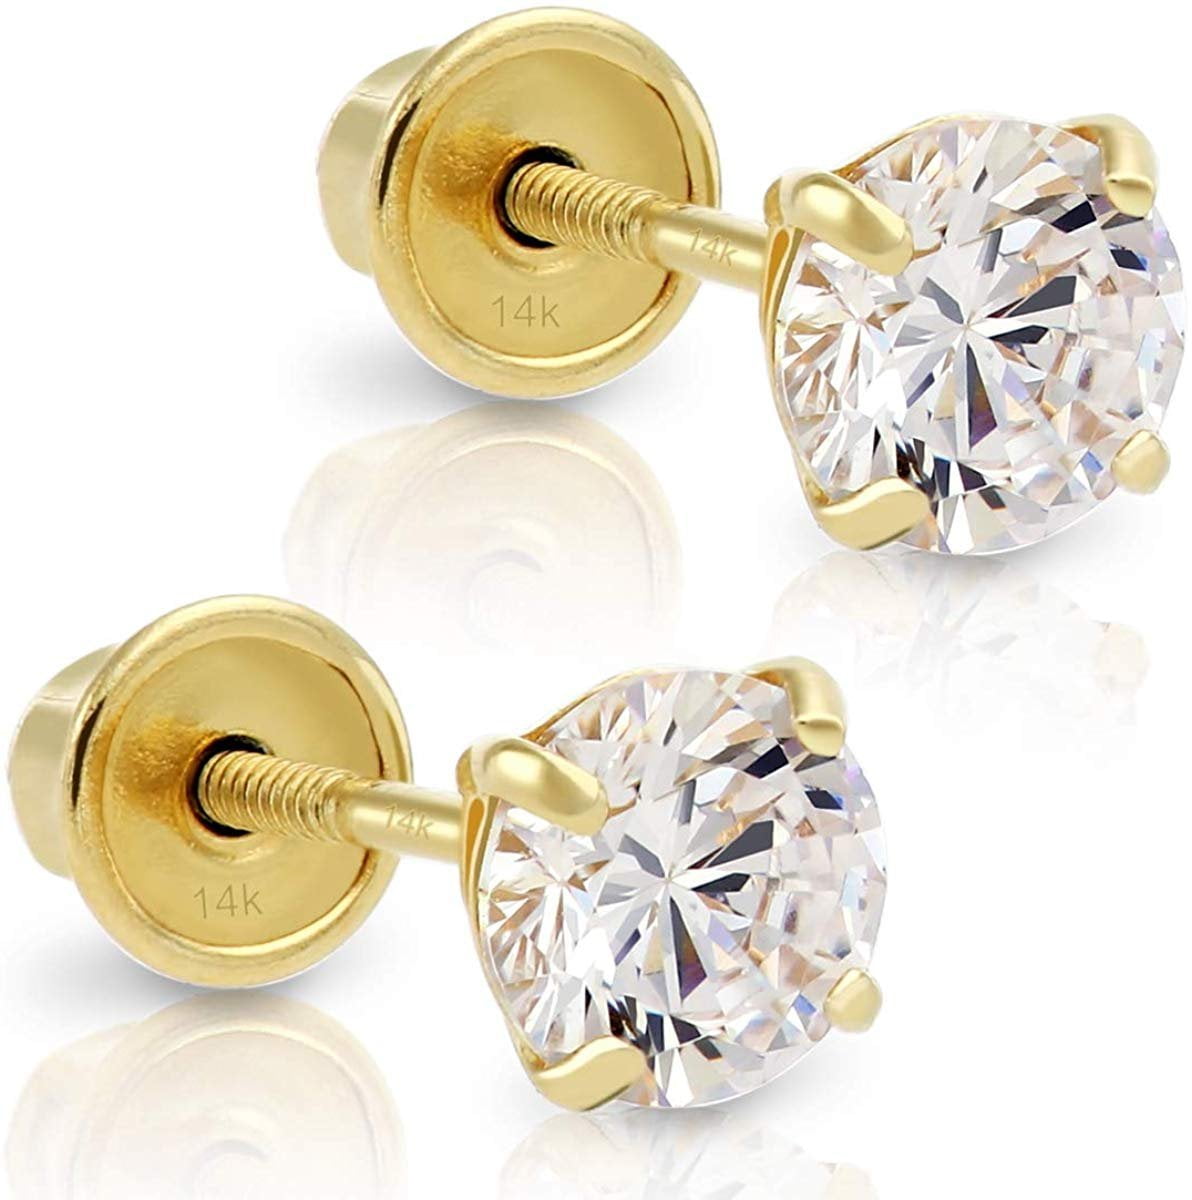 14k White Gold Made with SWAROVSKI Cubic Zirconia Solitaire Stud Earri –  Art and Molly